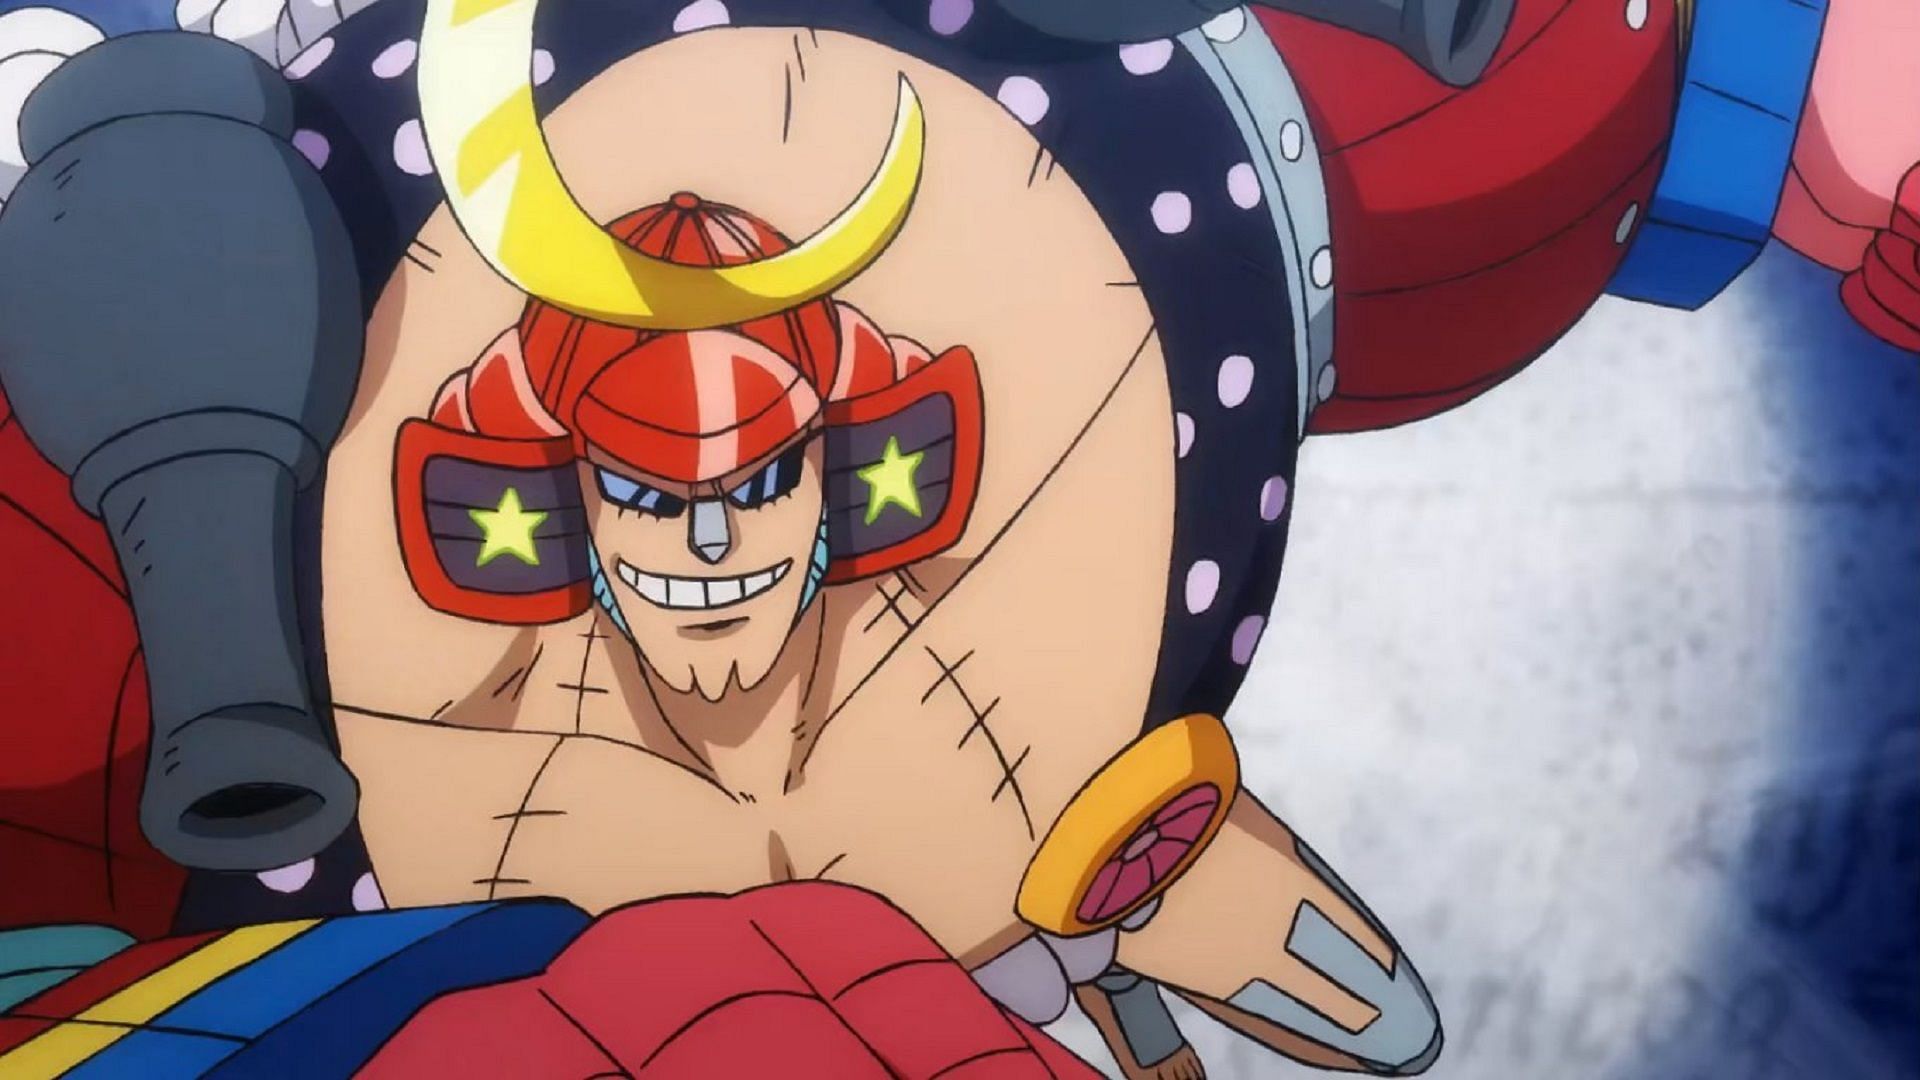 At the moment, Franky is a weaker cyborg than Queen (Image via Toei Animation, One Piece)